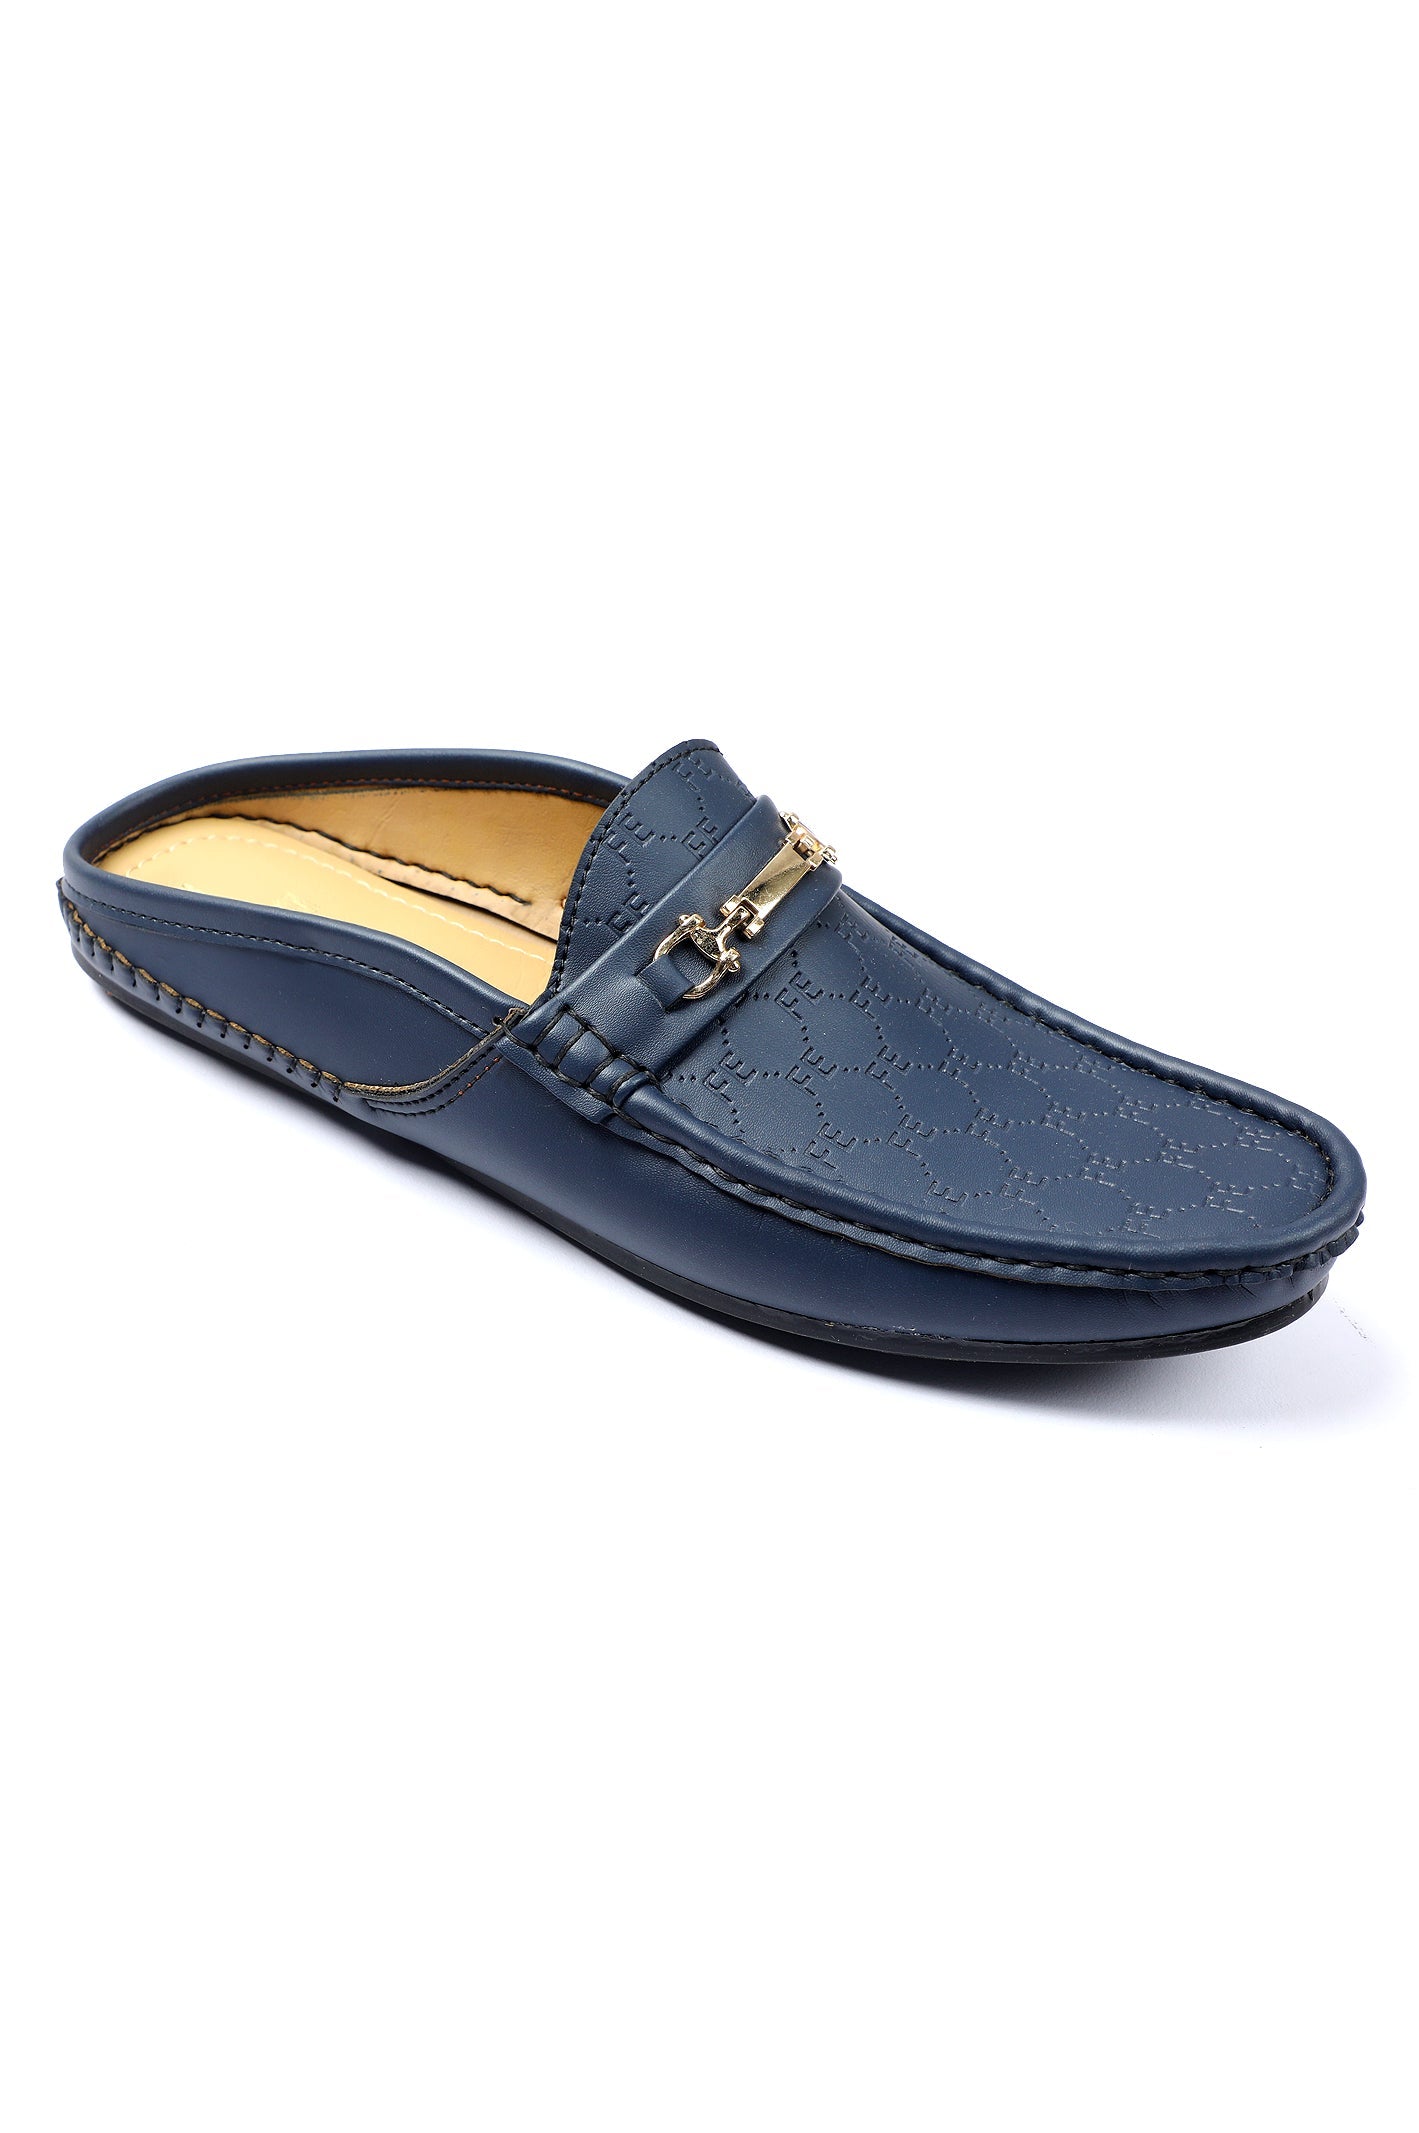 Casual Mule Shoes For Men SKU: SMC-0095-NAVY - Diners